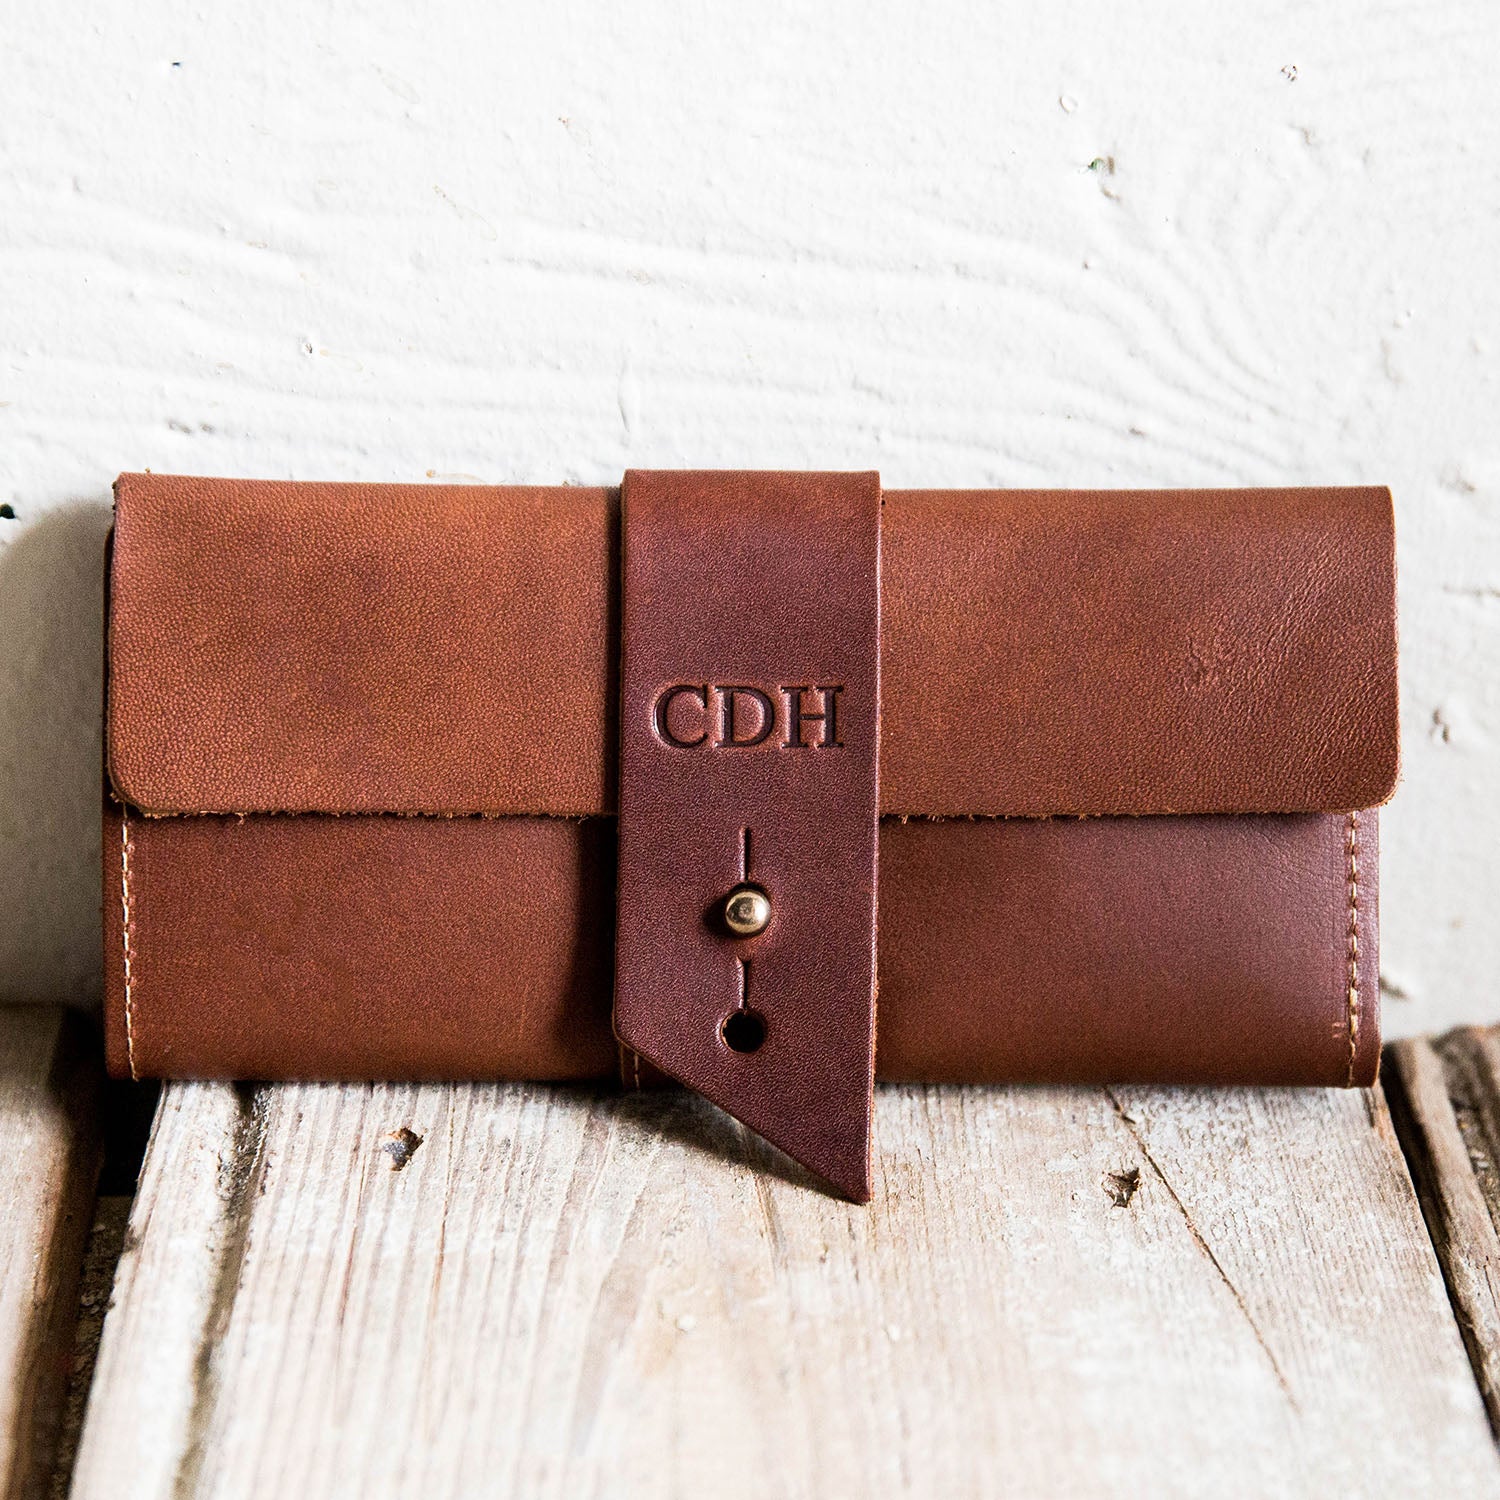 Fine leather pocketbook and checkbook with personalized initials from Holtz Leather Co in Huntsville, Alabama